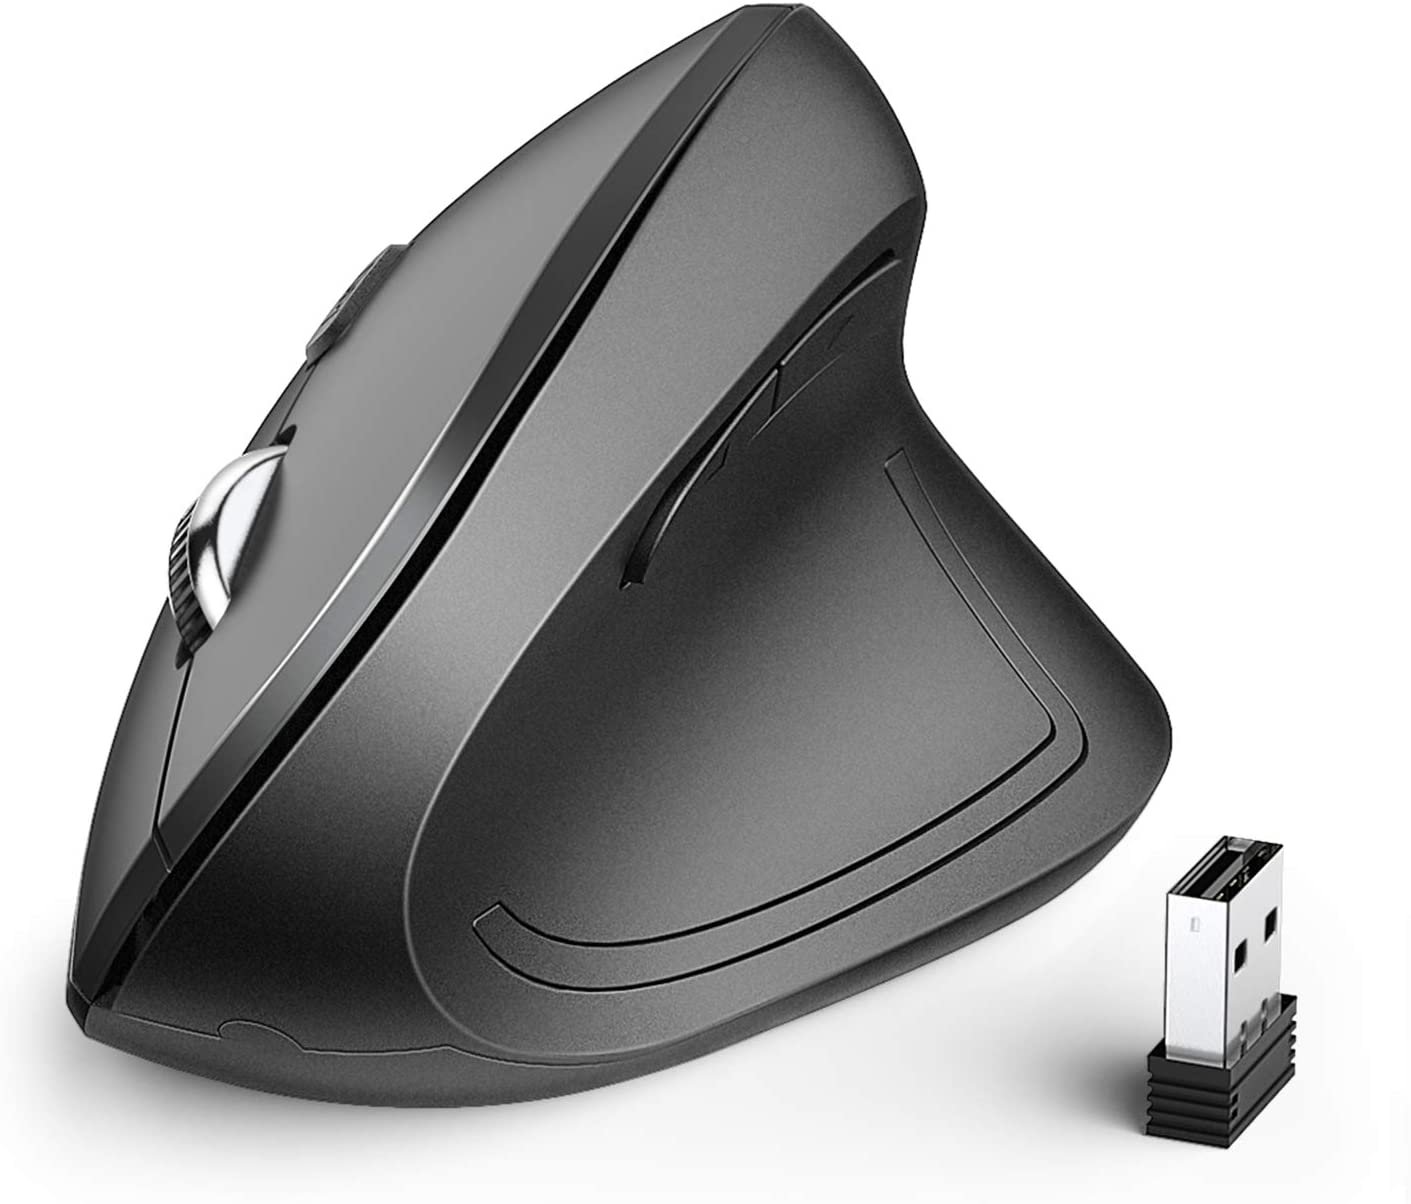 IClever Ergonomic Mouse 